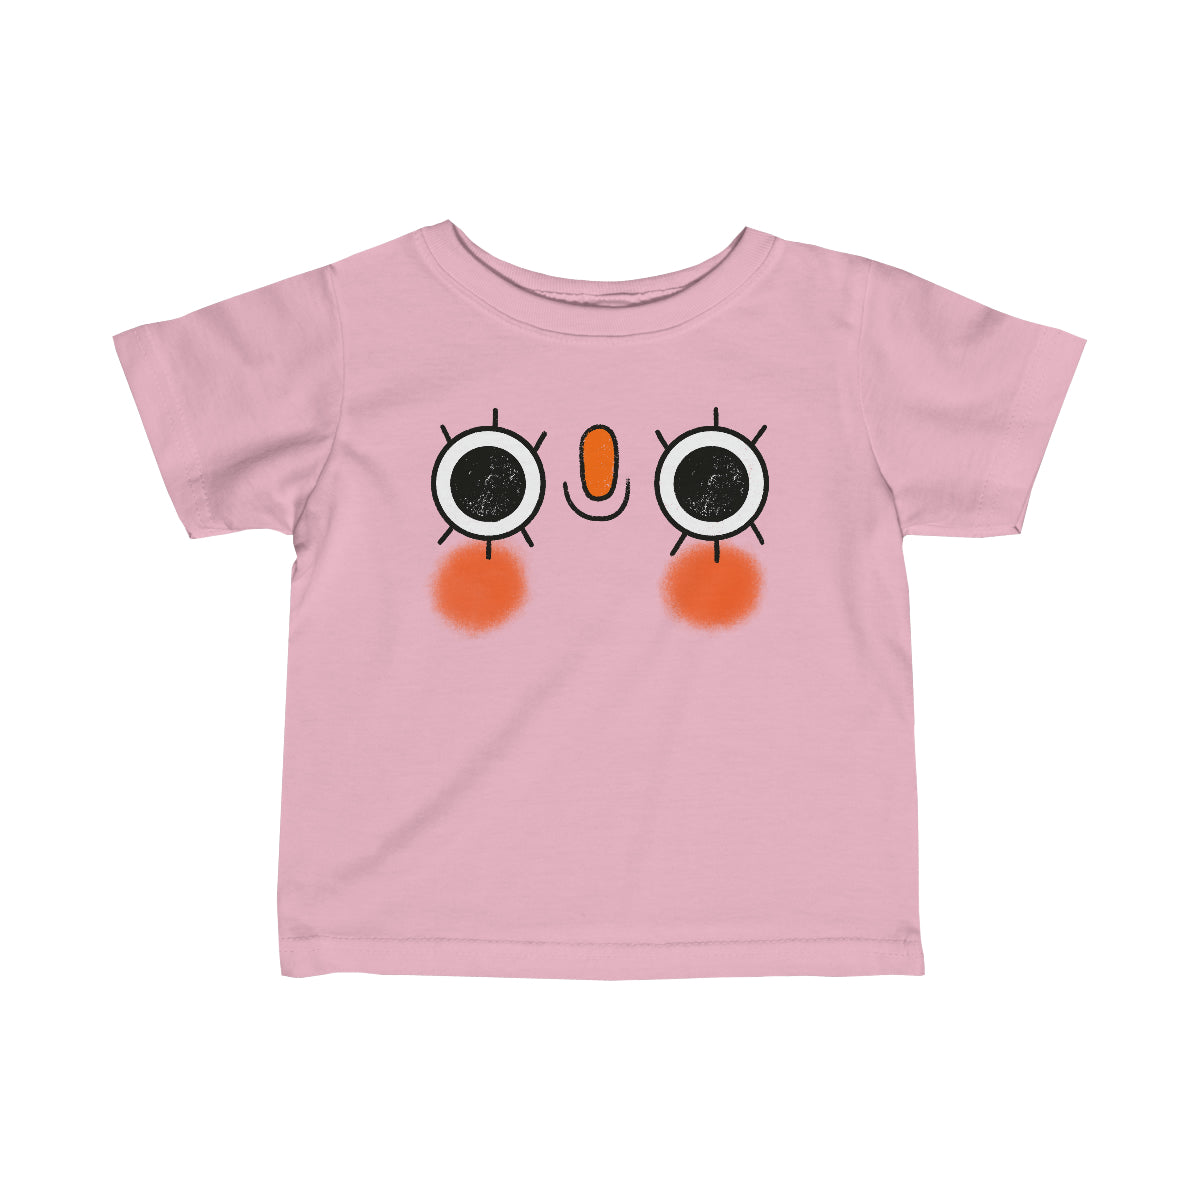 Happy Hungry Baby/Toddler Tee